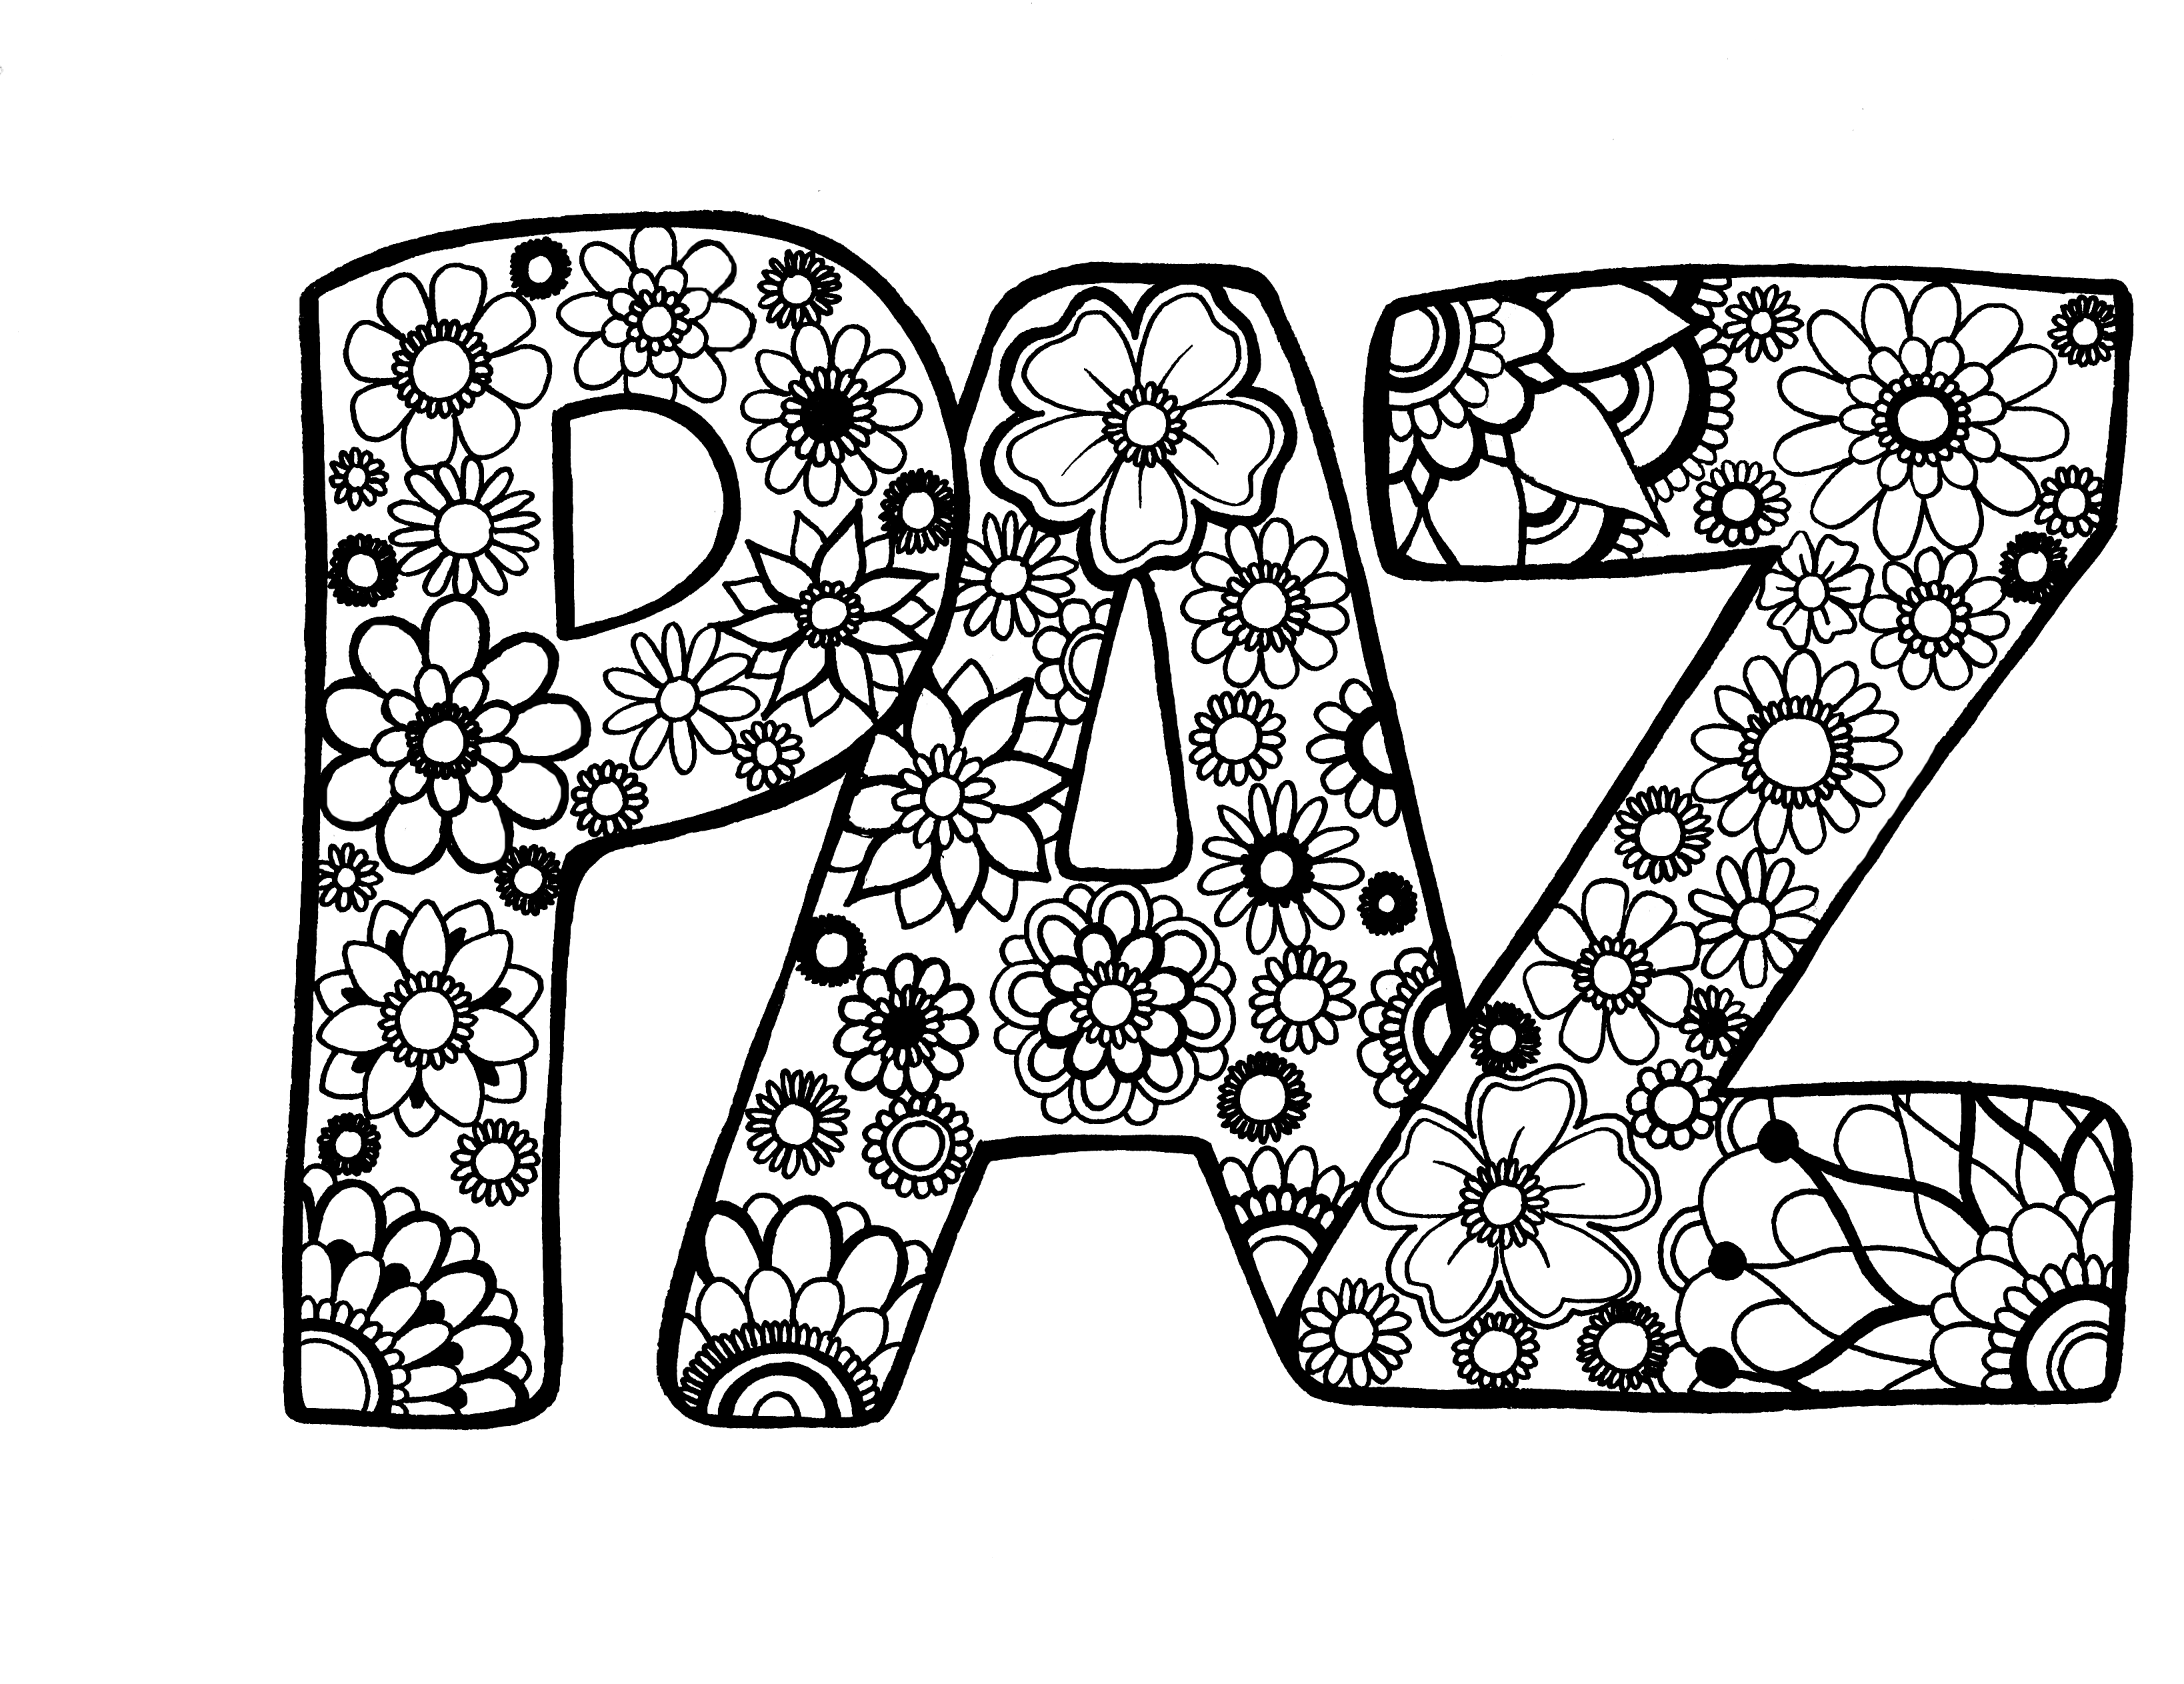 Intricately patterned coloring page featuring the word 'PAZ,' which means 'peace' in Spanish, filled with various mandala-inspired floral designs. Each letter is a canvas of different flowers and petals with diverse shapes and sizes, offering a rich texture to be brought to life with color. This artistic representation of a powerful word provides a serene coloring experience, perfect for adults seeking a creative and peaceful art activity.. Free coloring page :: YouColor